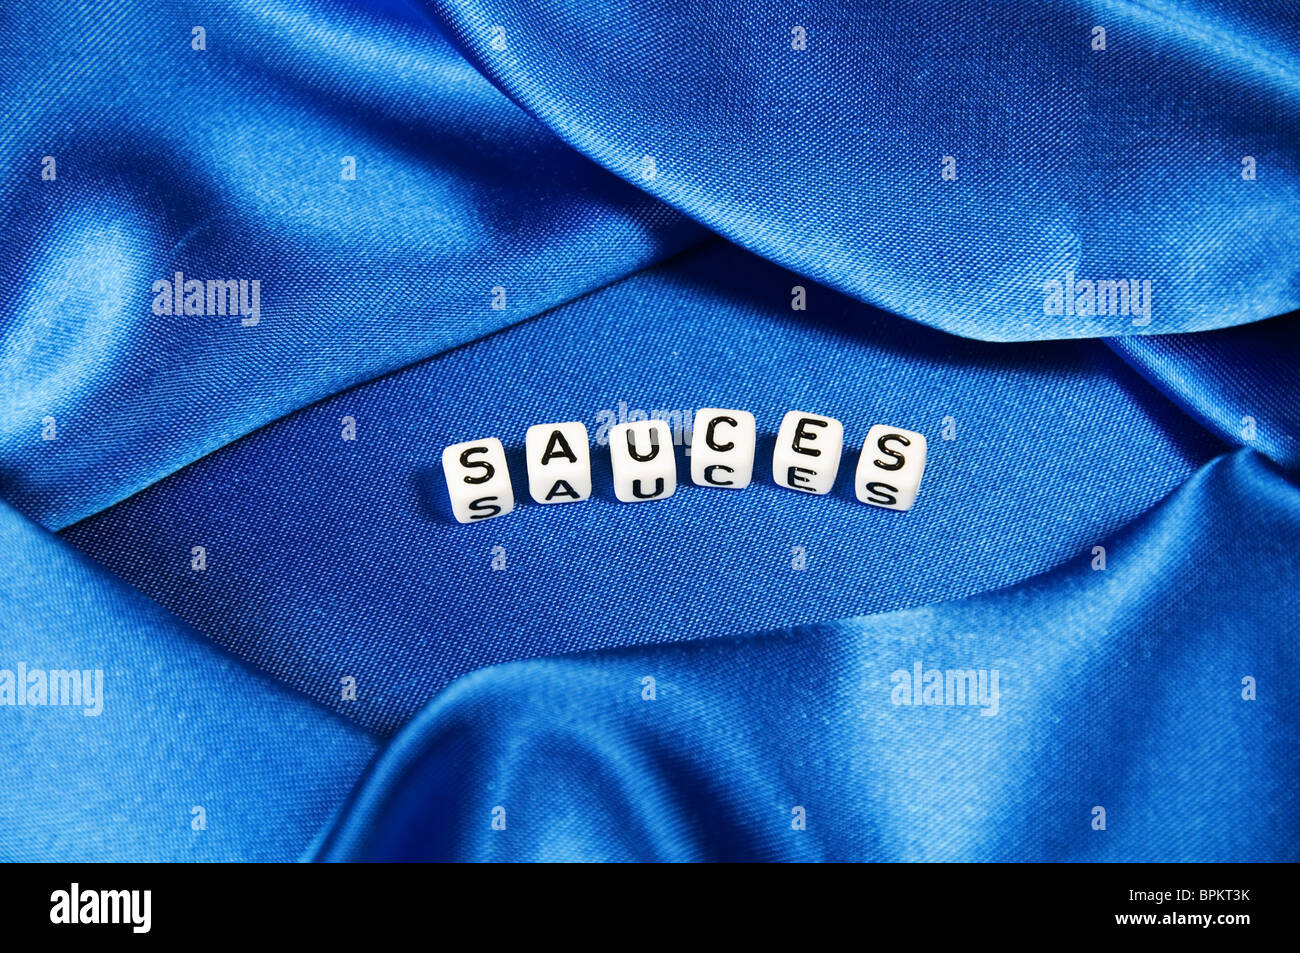 Royal blue satin background with rich folds and wrinkles for texture is the word sauces in cube lettering in this series. Stock Photo